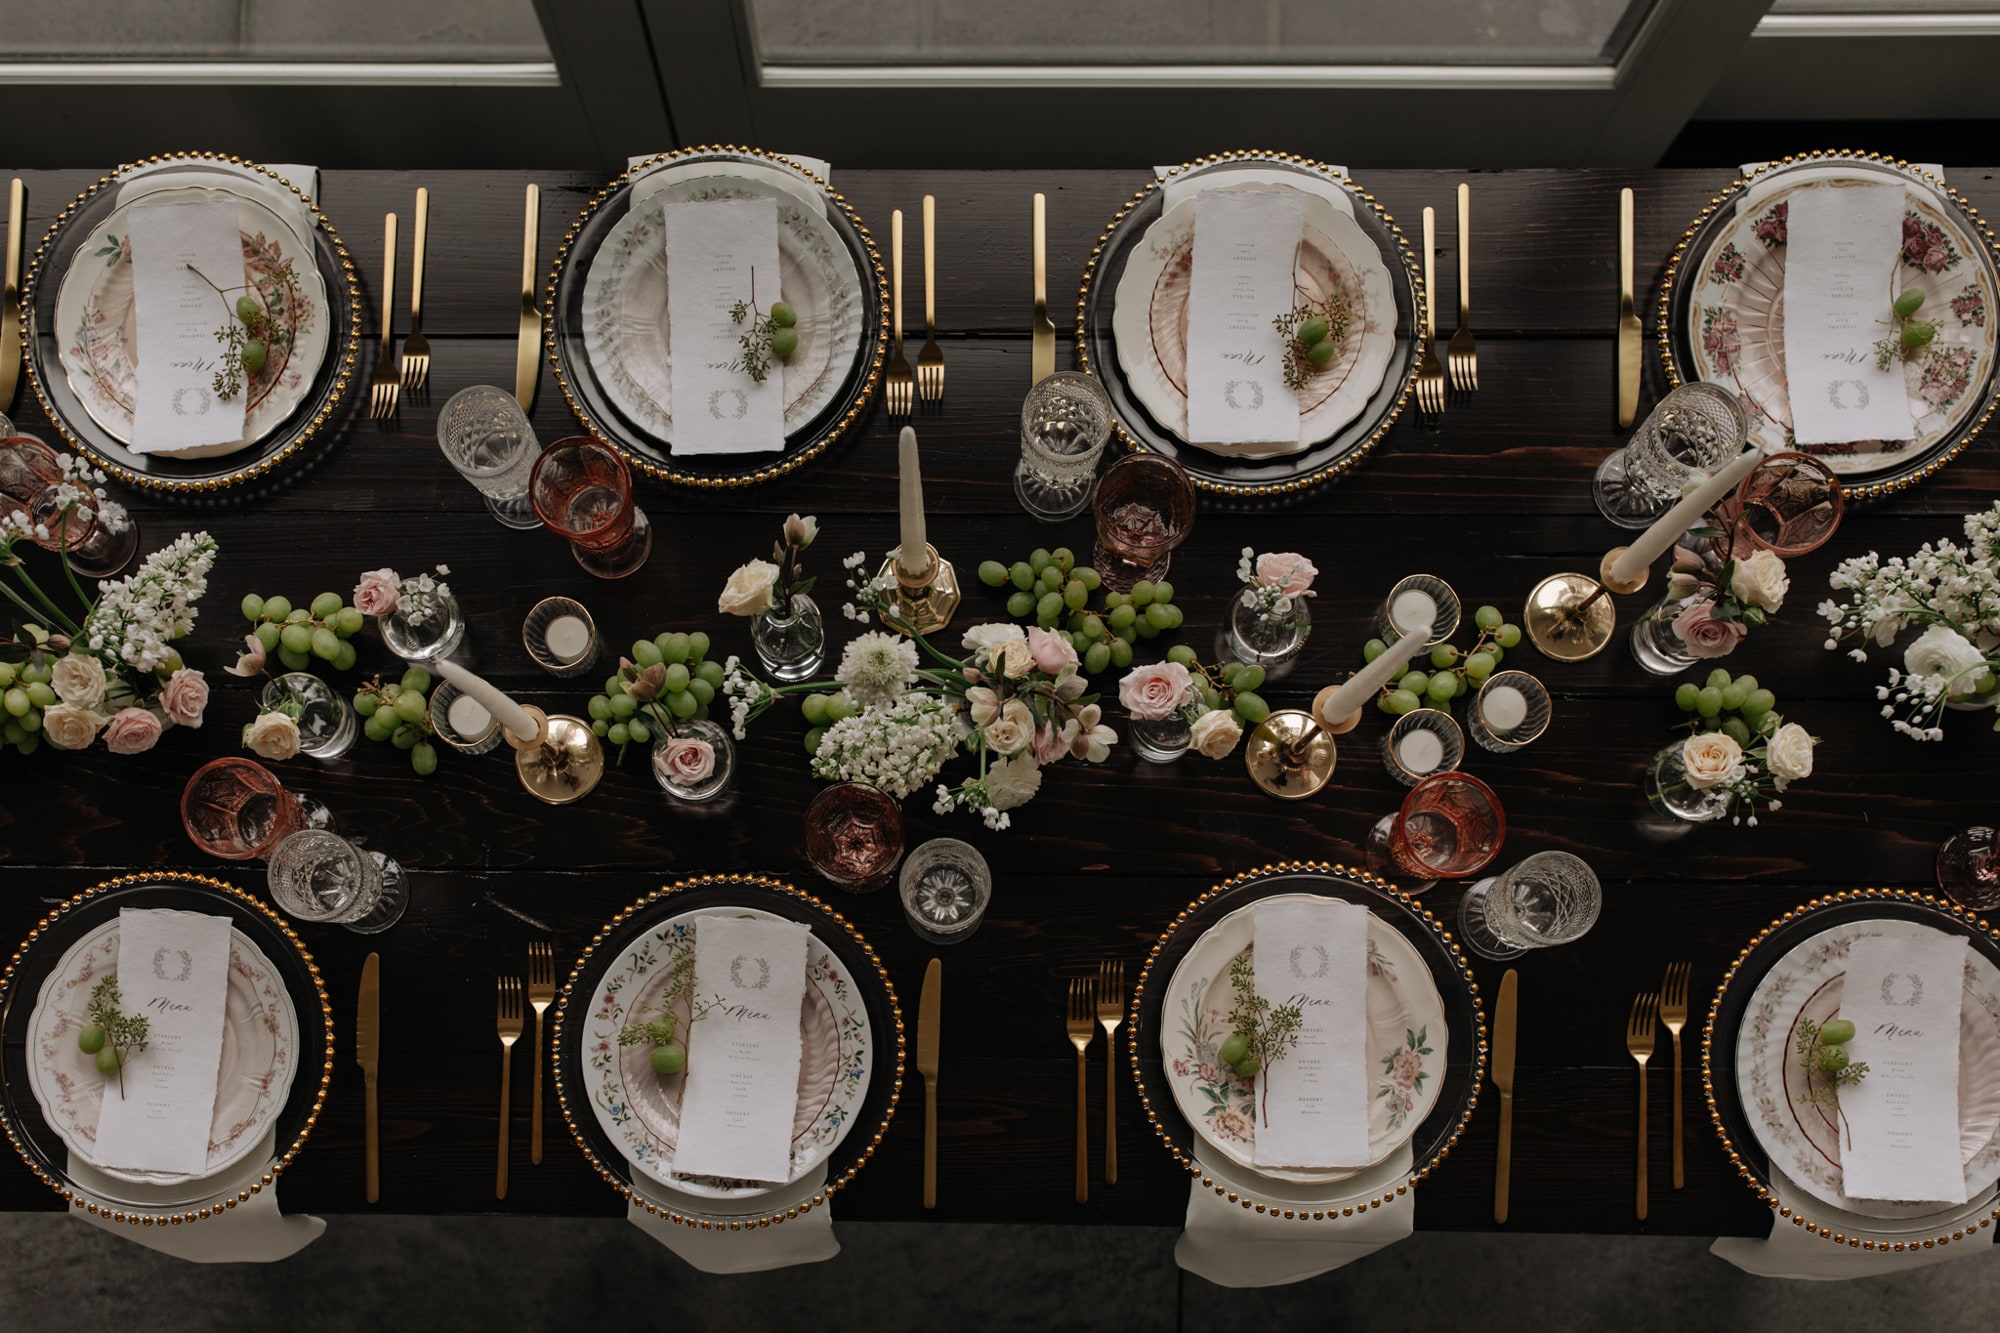 Looking down upon a beautiful wedding table setting at Hutton House, captured by Minneapolis wedding photographer Josh Olson.